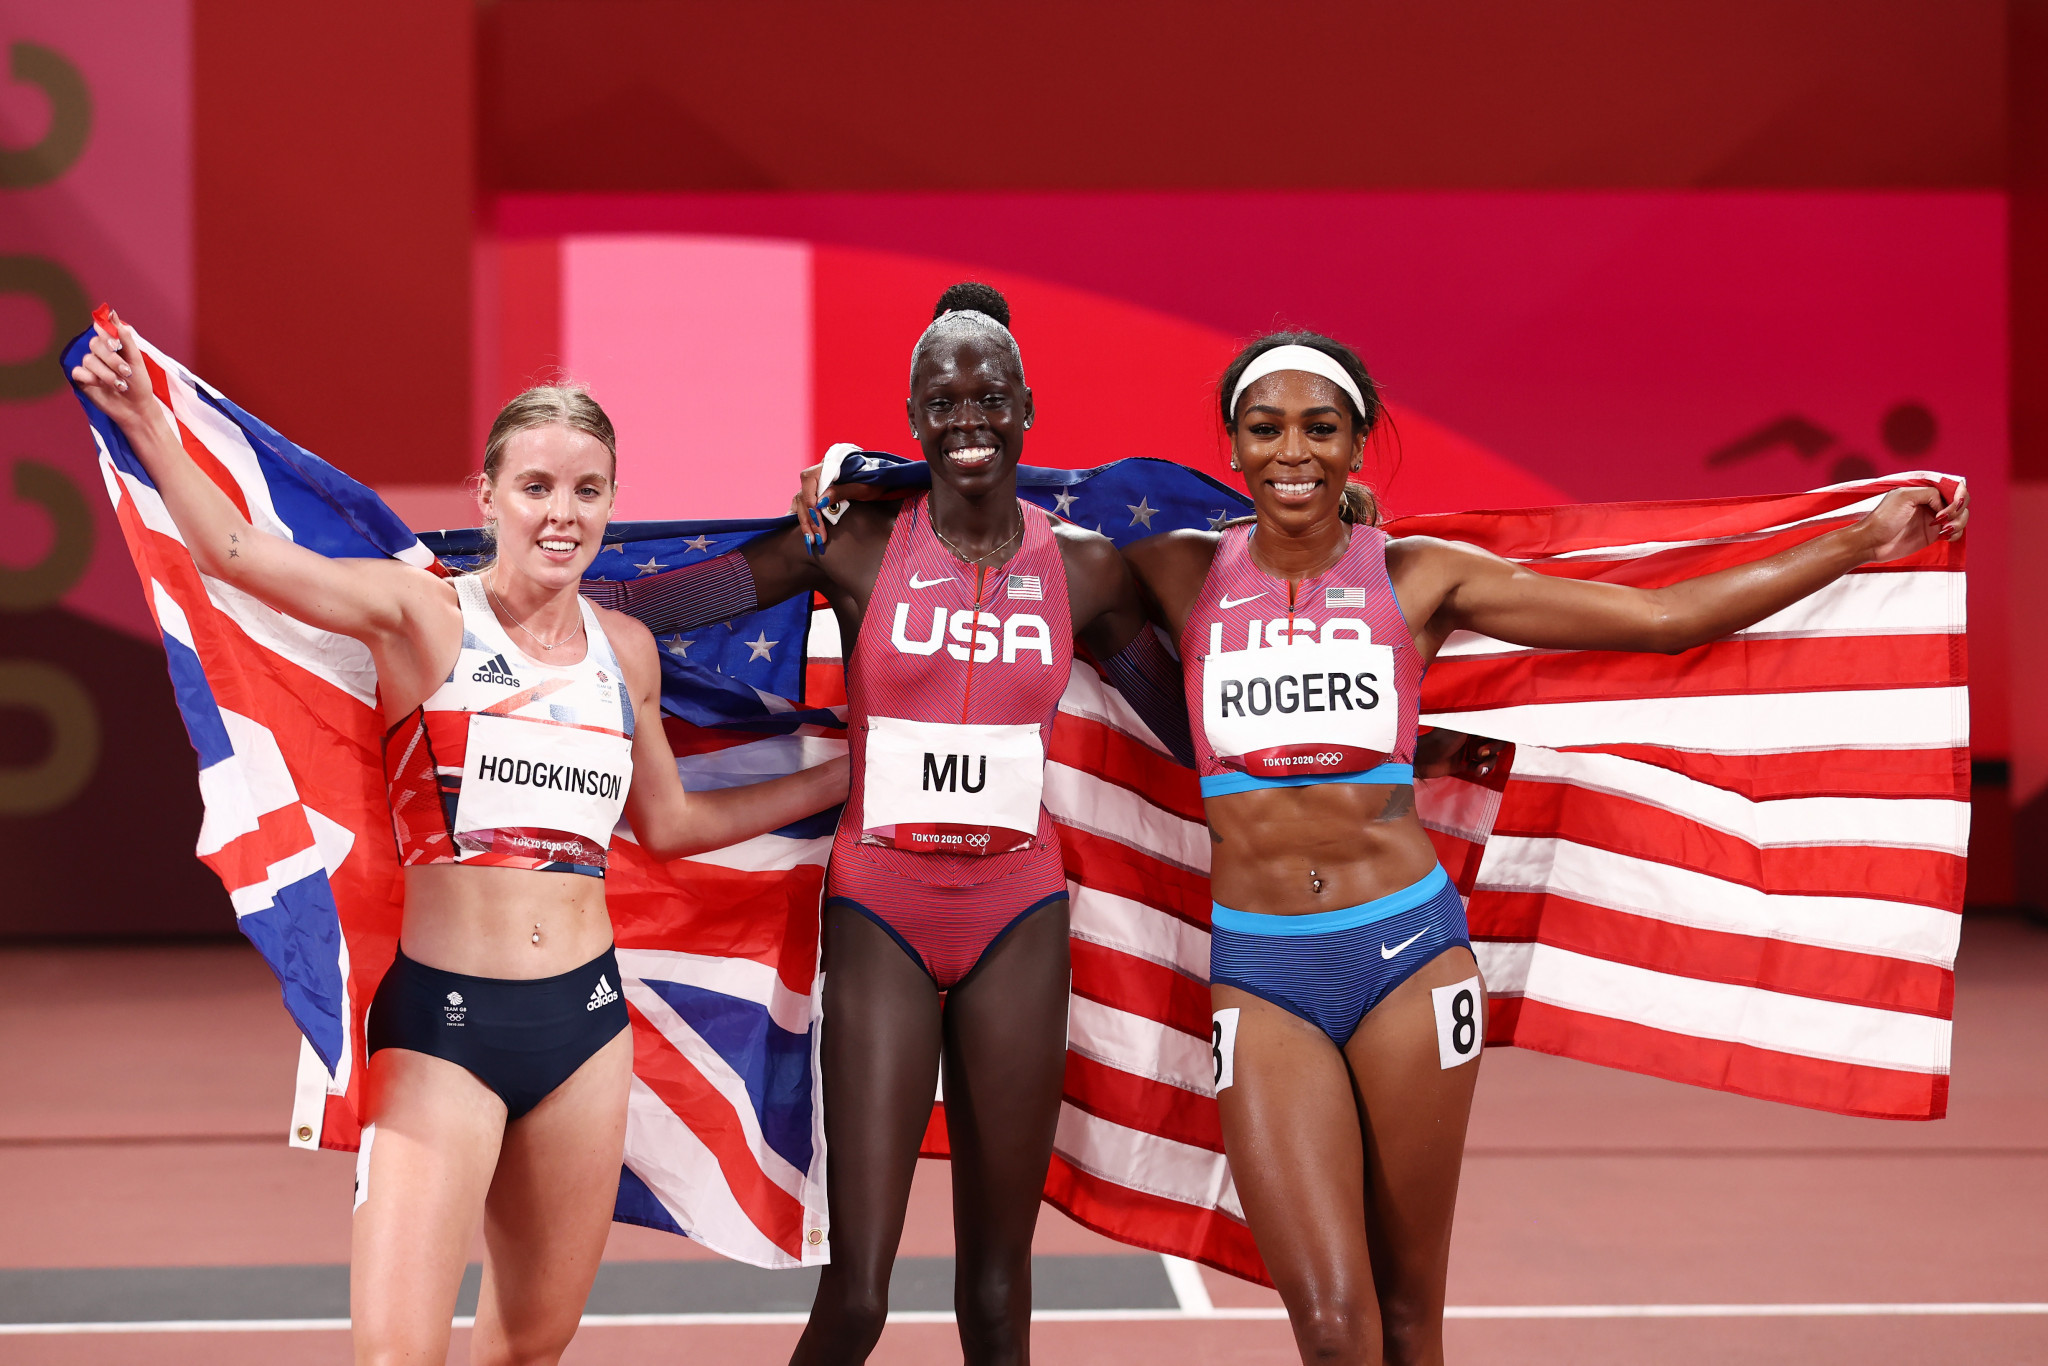 Tokyo's silver, gold and bronze medallists - Keely Hodgkinson, Athing Mu, and Raevyn Rogers, left to right - will compete in the women's 800m in Eugene ©Getty Images